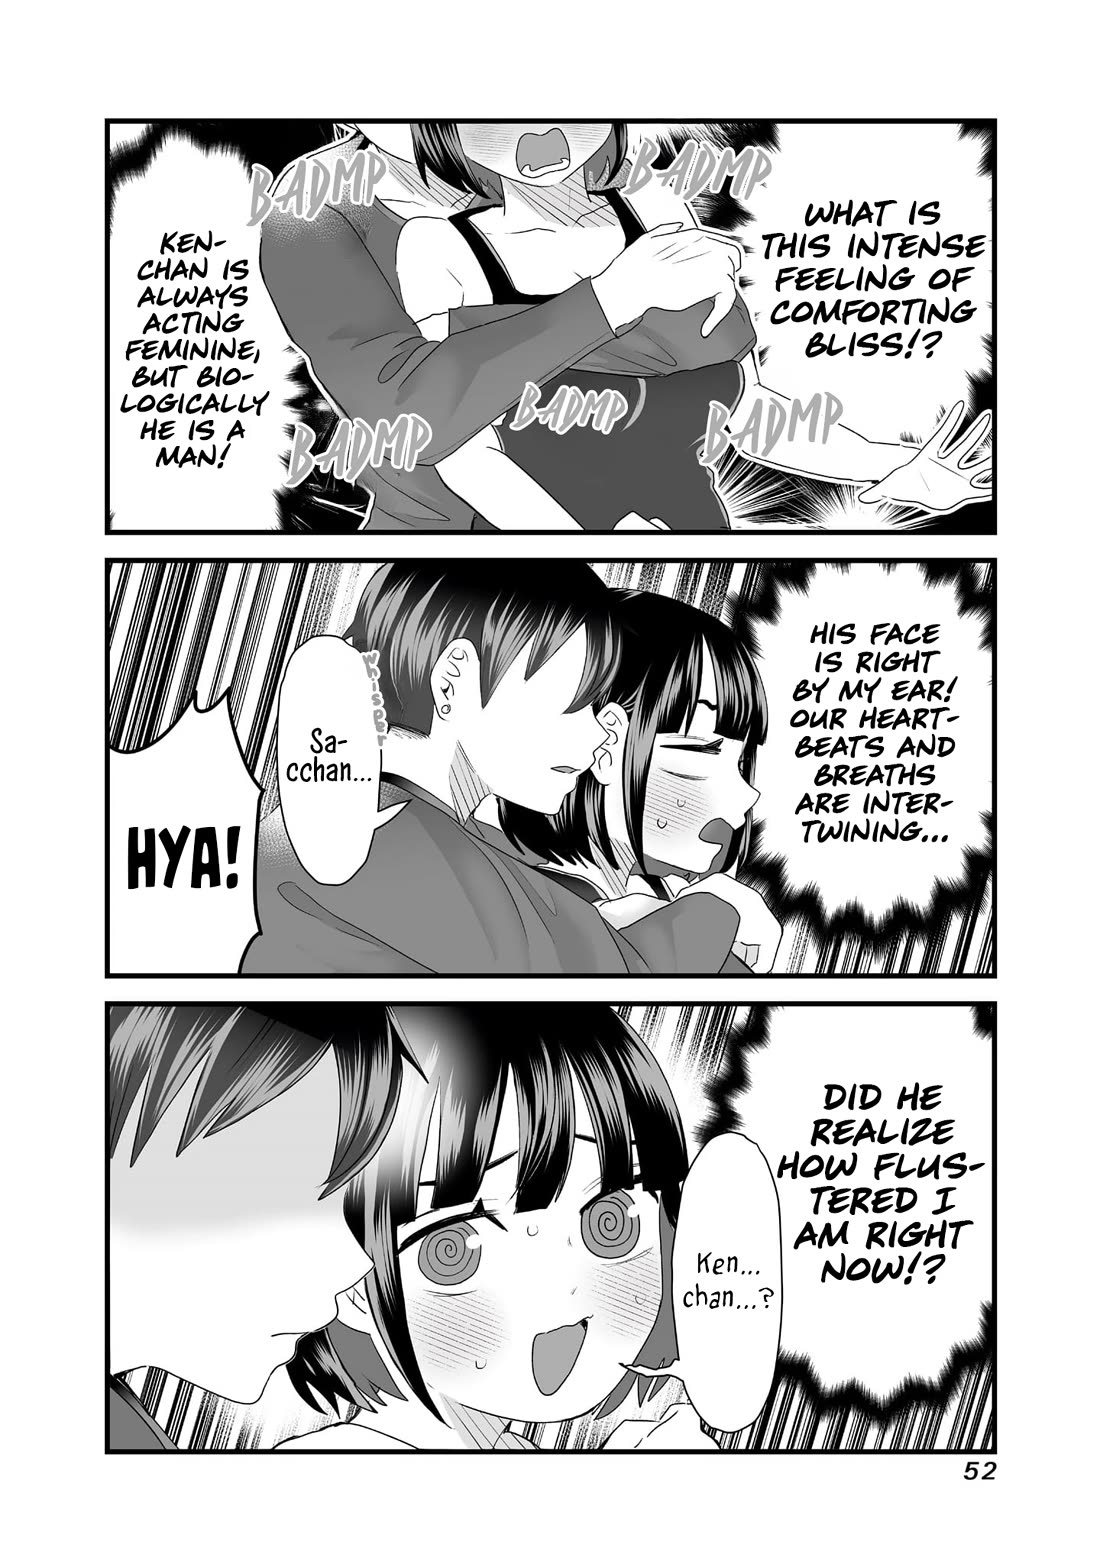 Sacchan and Ken-chan Are Going at it Again - chapter 6 - #4